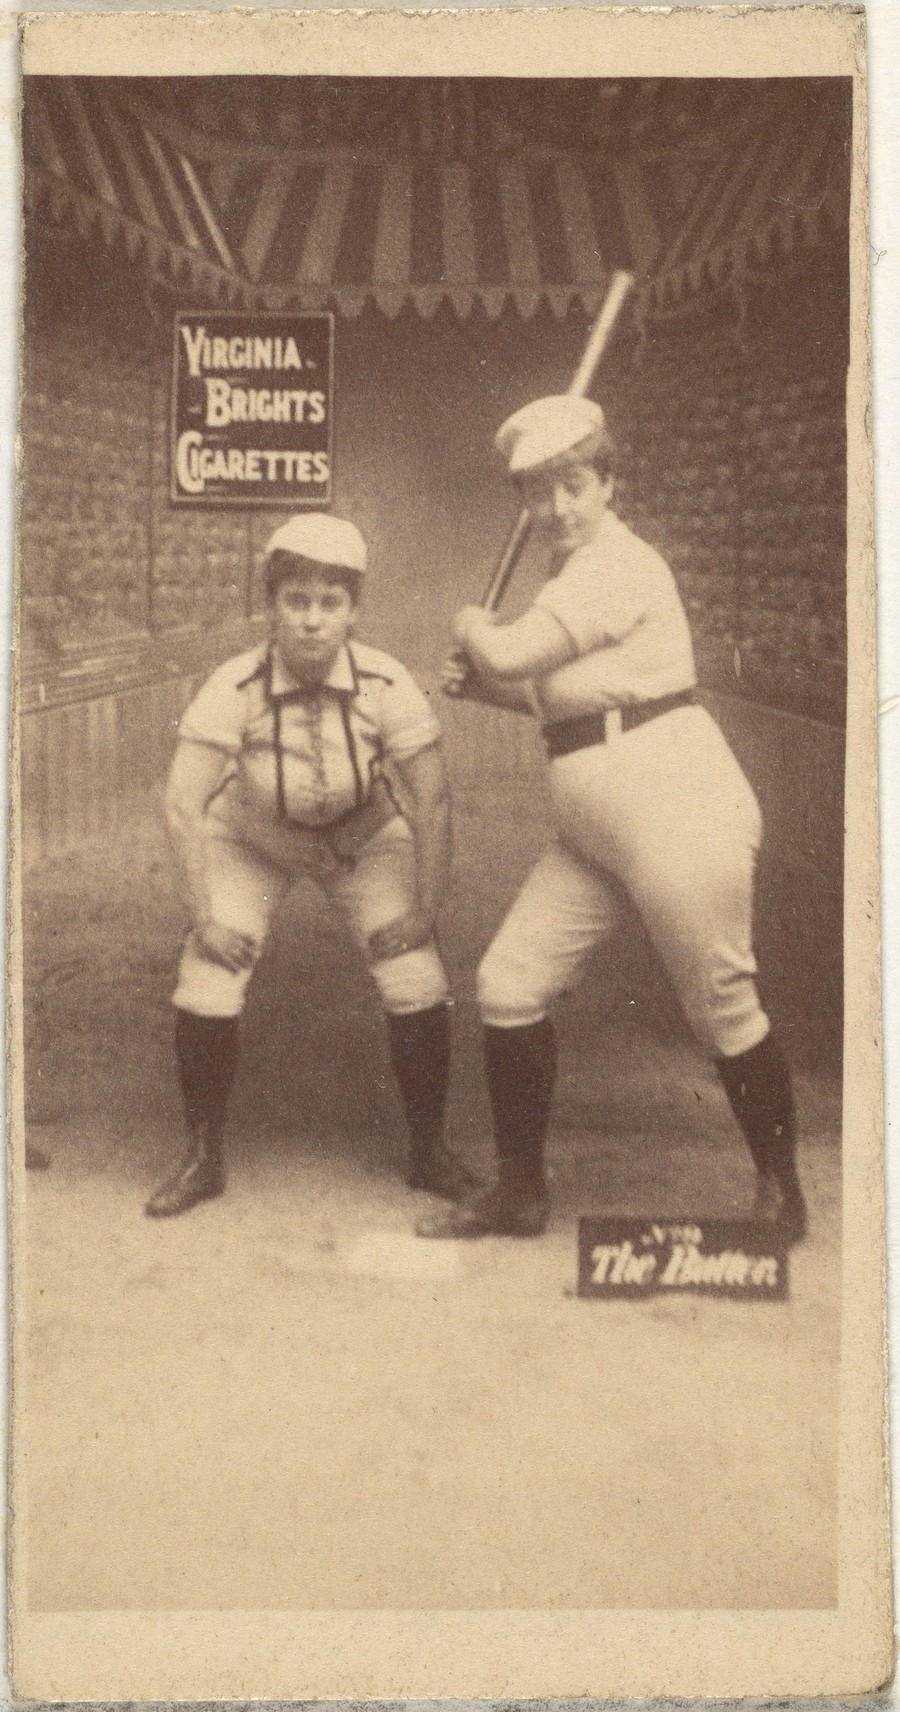 The Batter, from the Girl Baseball Players series (N48, Type 2) for Virginia Brights Cigarettes / 1886